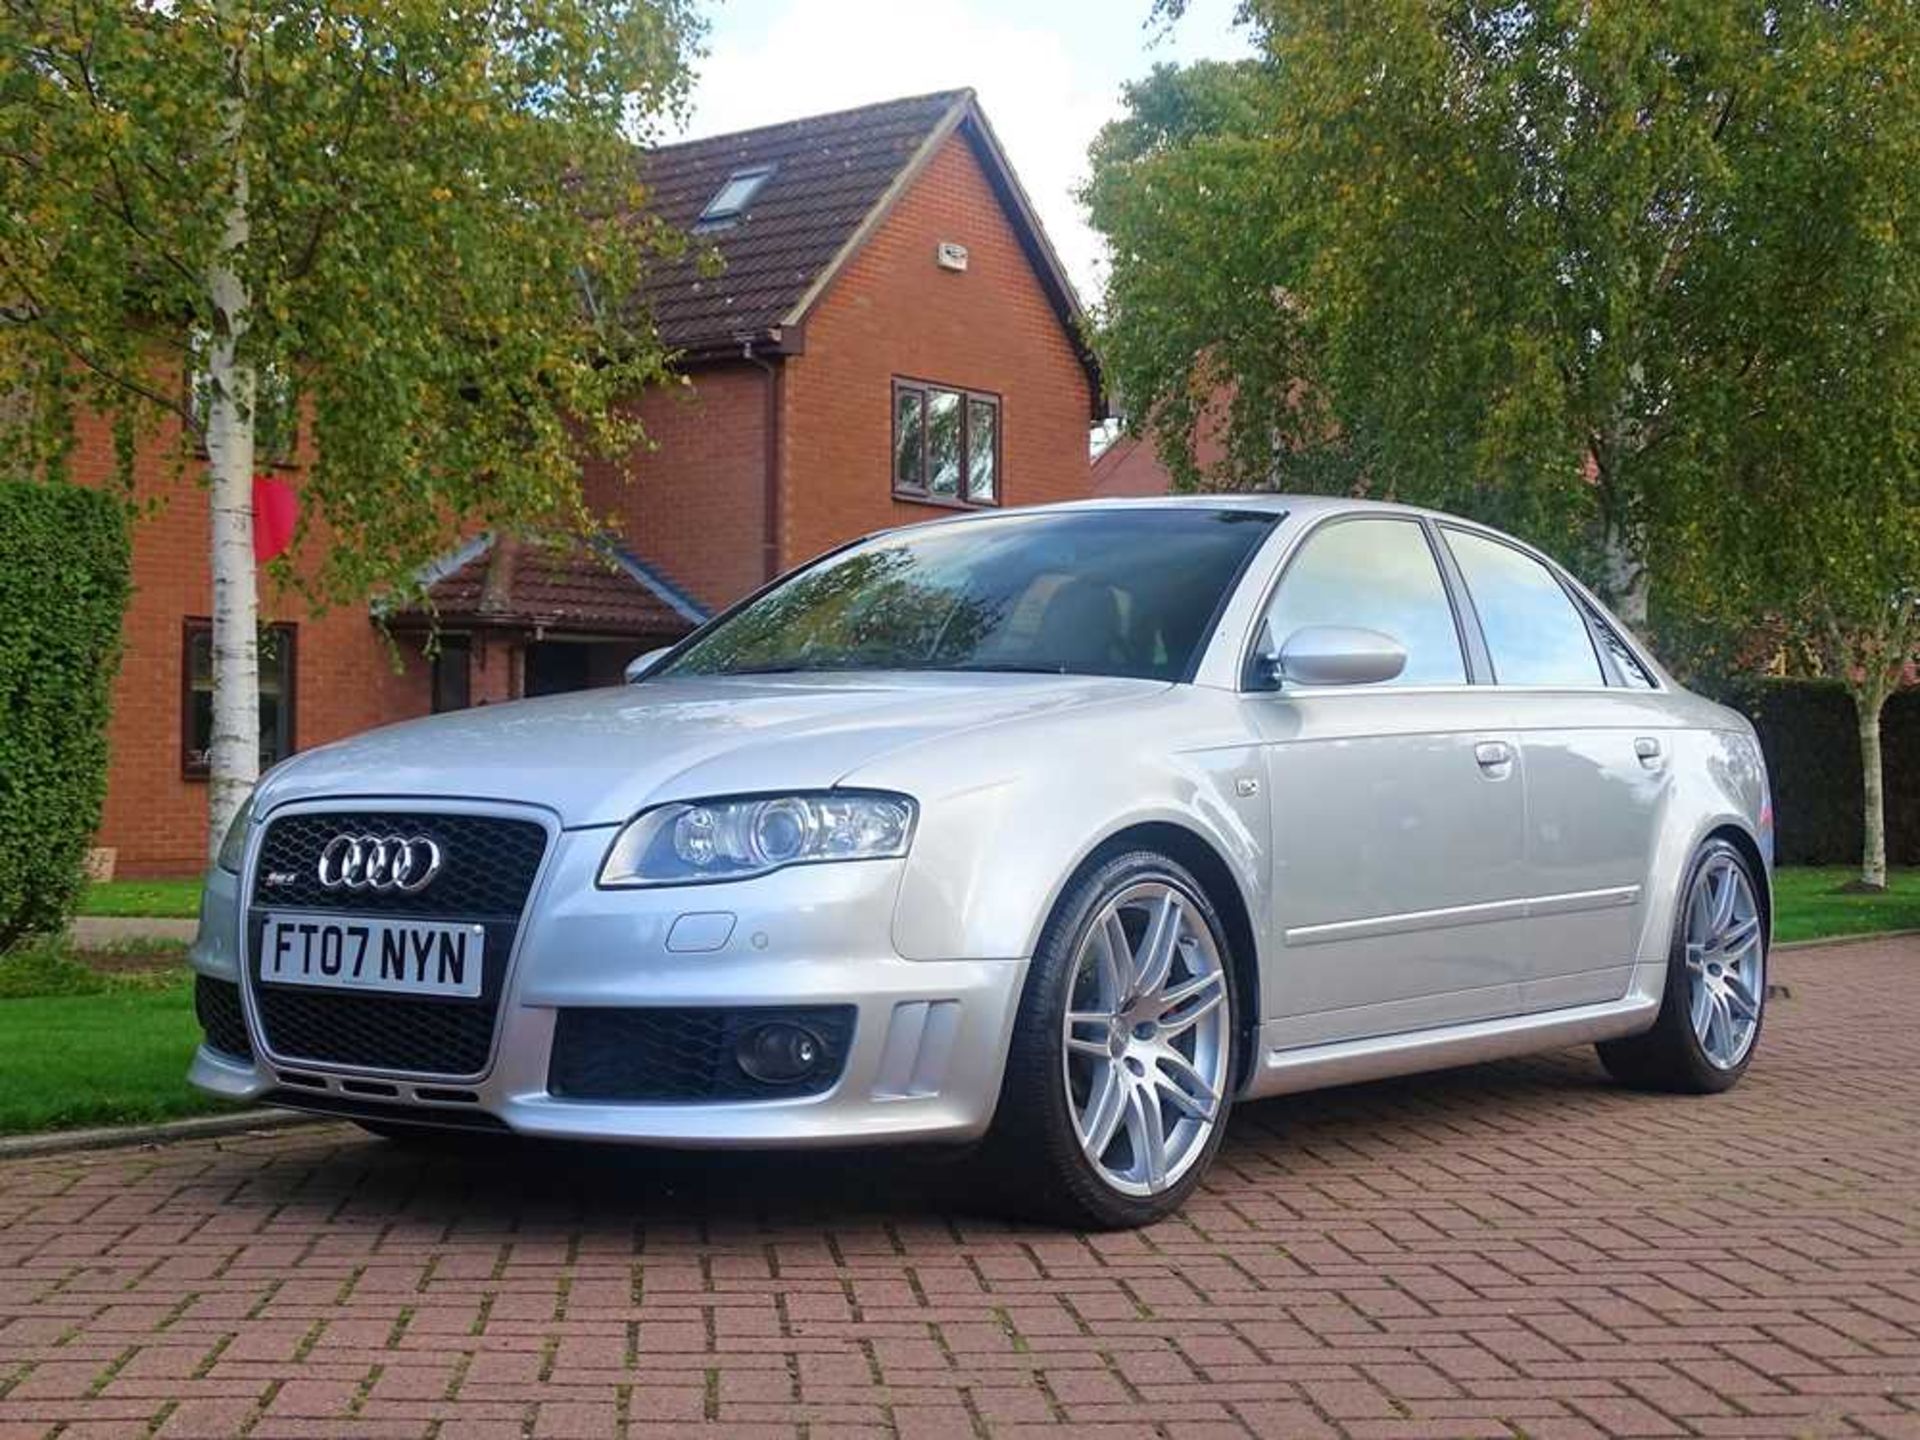 2007 Audi RS4 Saloon One owner and just c.60,000 miles from new - Image 69 of 86